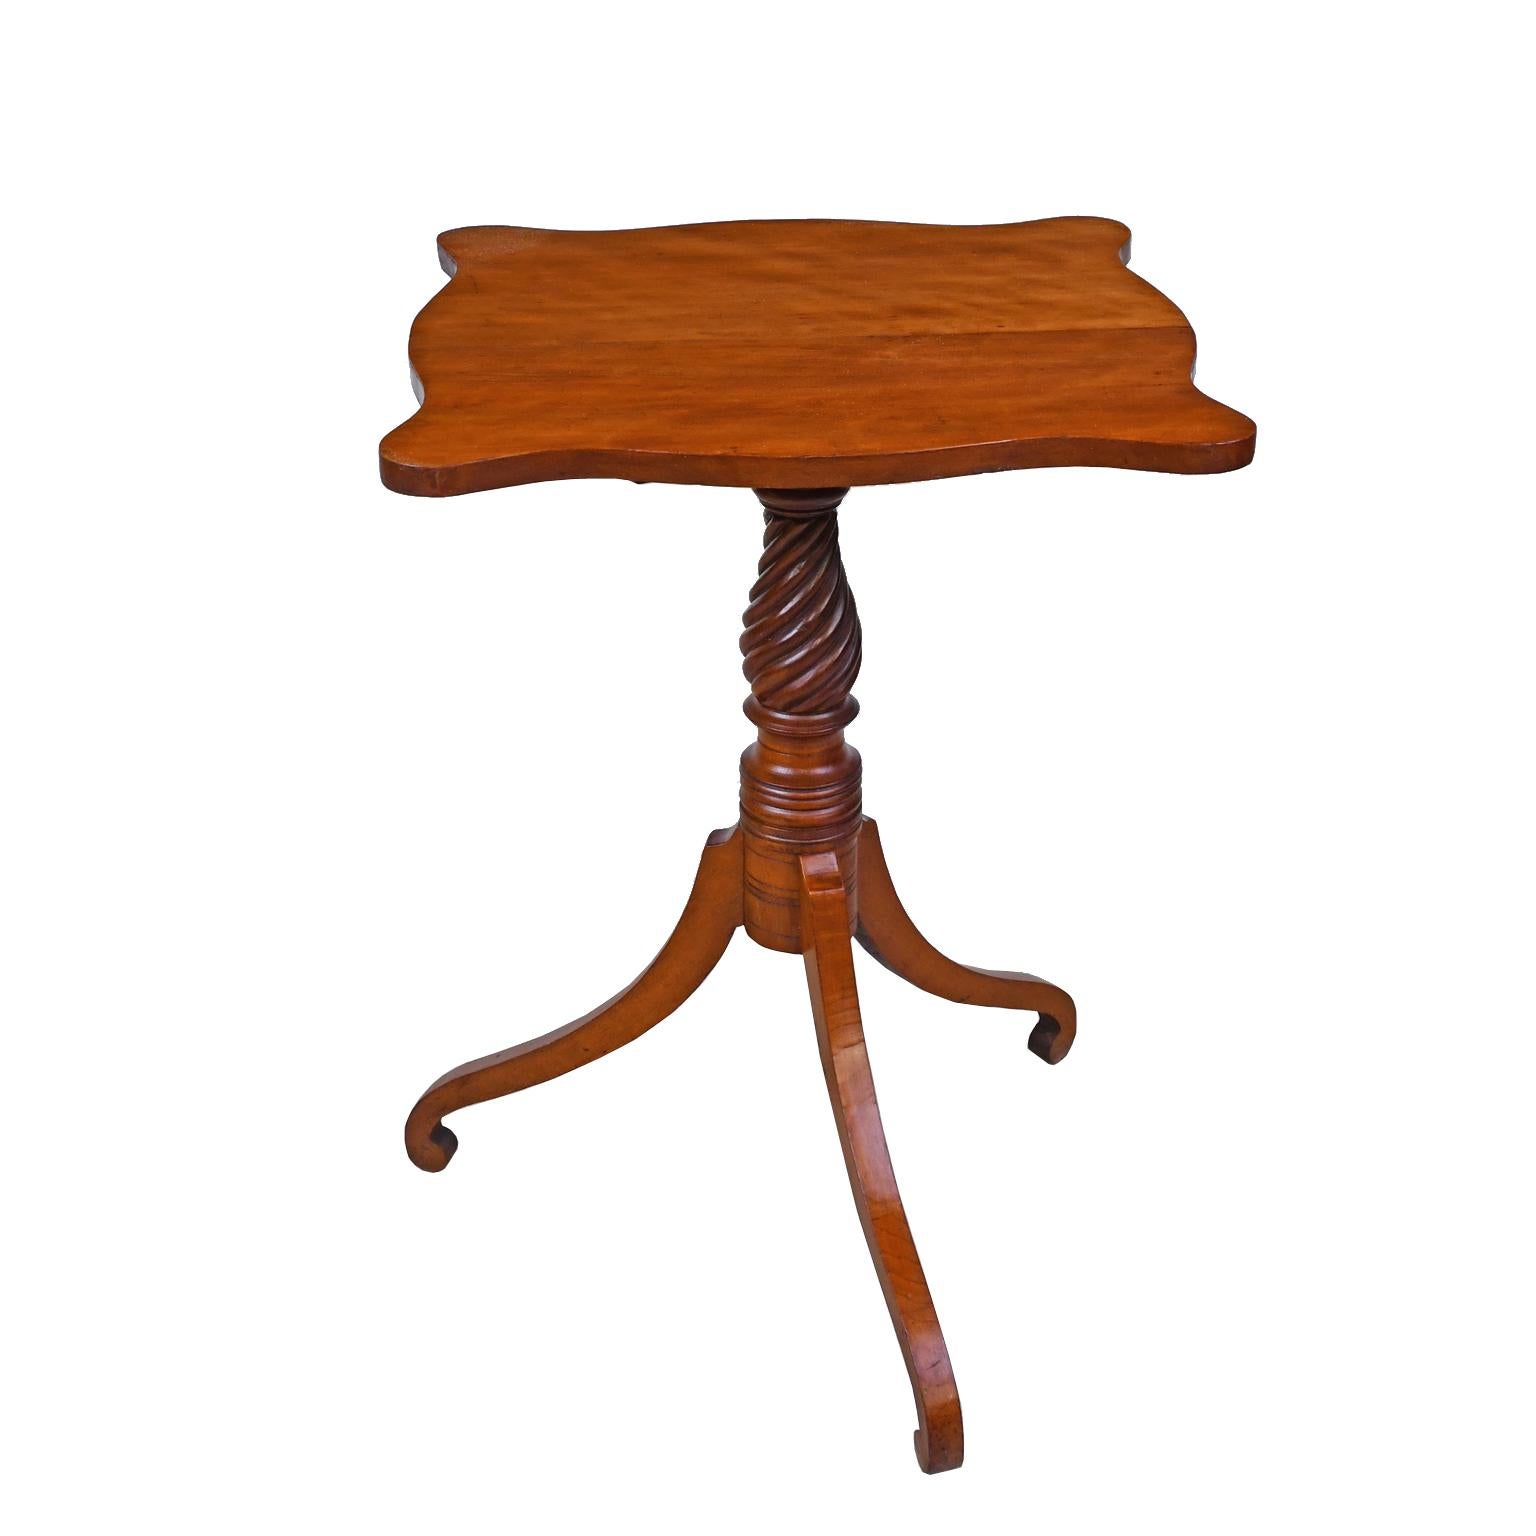 A lovely Federal tilt-top table in cherrywood with tripod base that historically doubled as a candlestand. The candlestick could rest on the ledge provided when the tabletop was tilted up and not in use. The curved top is on a pedestal with a